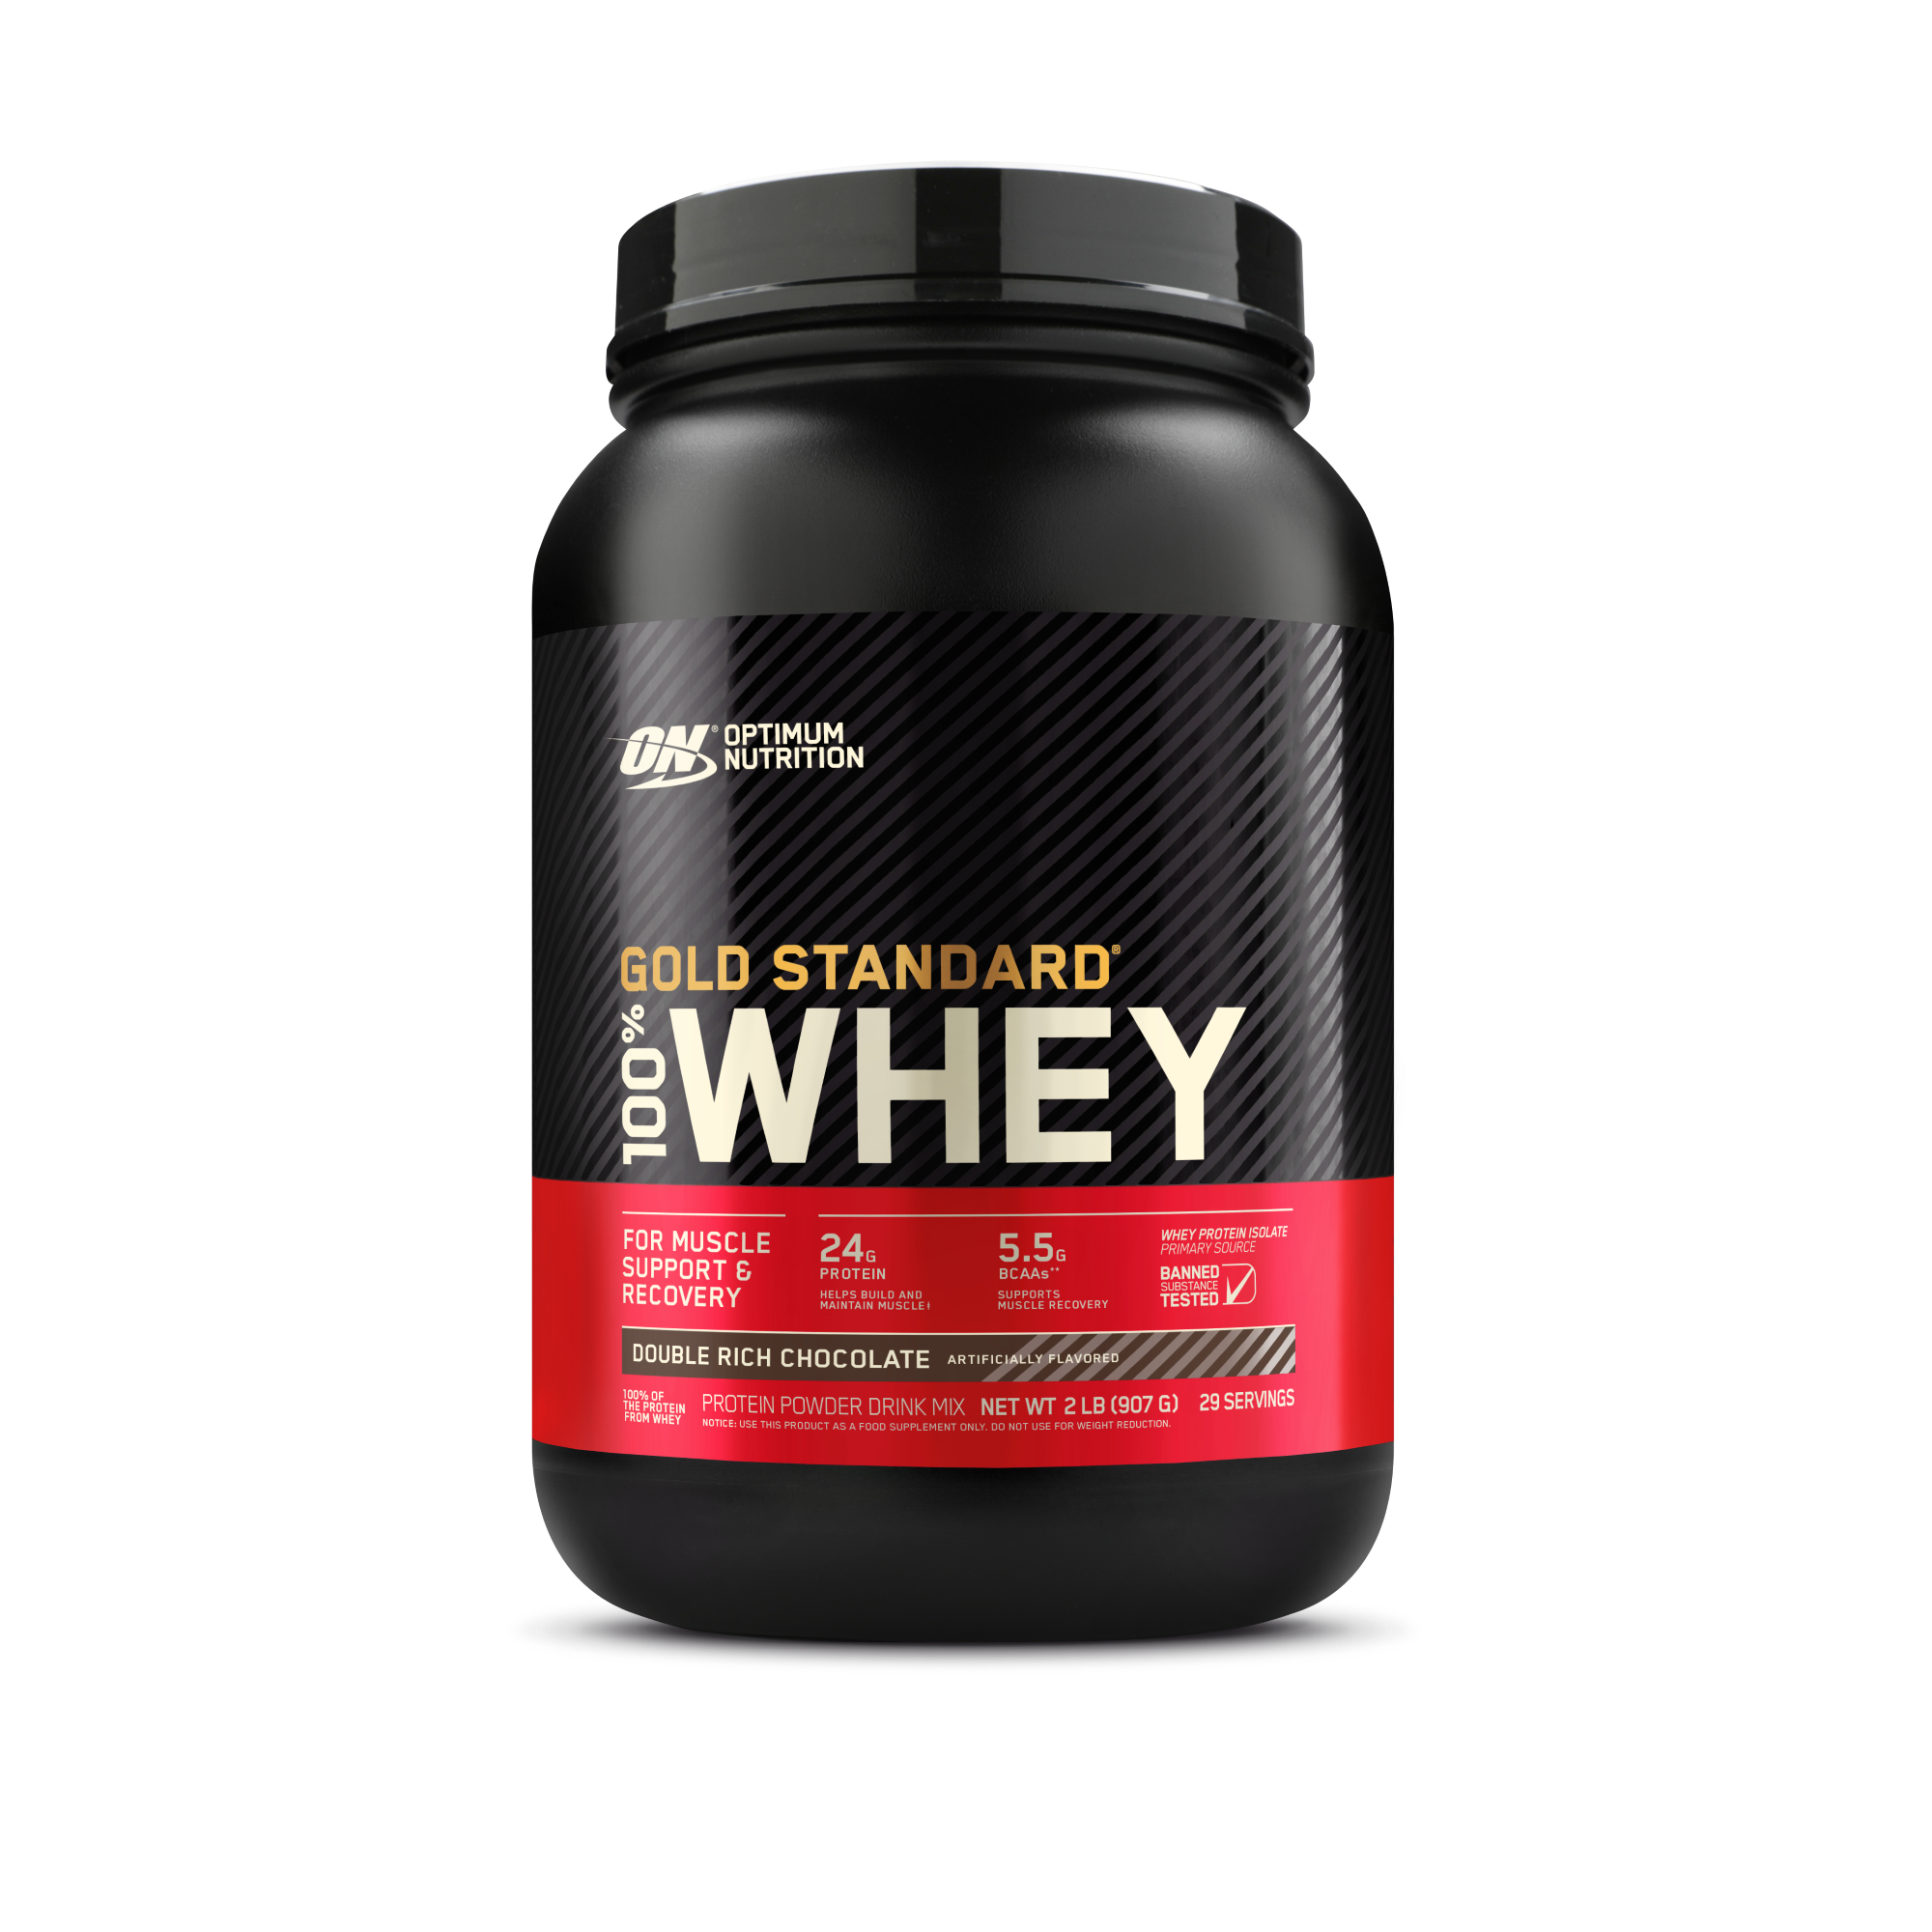 PROTEIN 1kg REAL WPI PROTEIN PREMIUM QUALITY PRODUCTS 